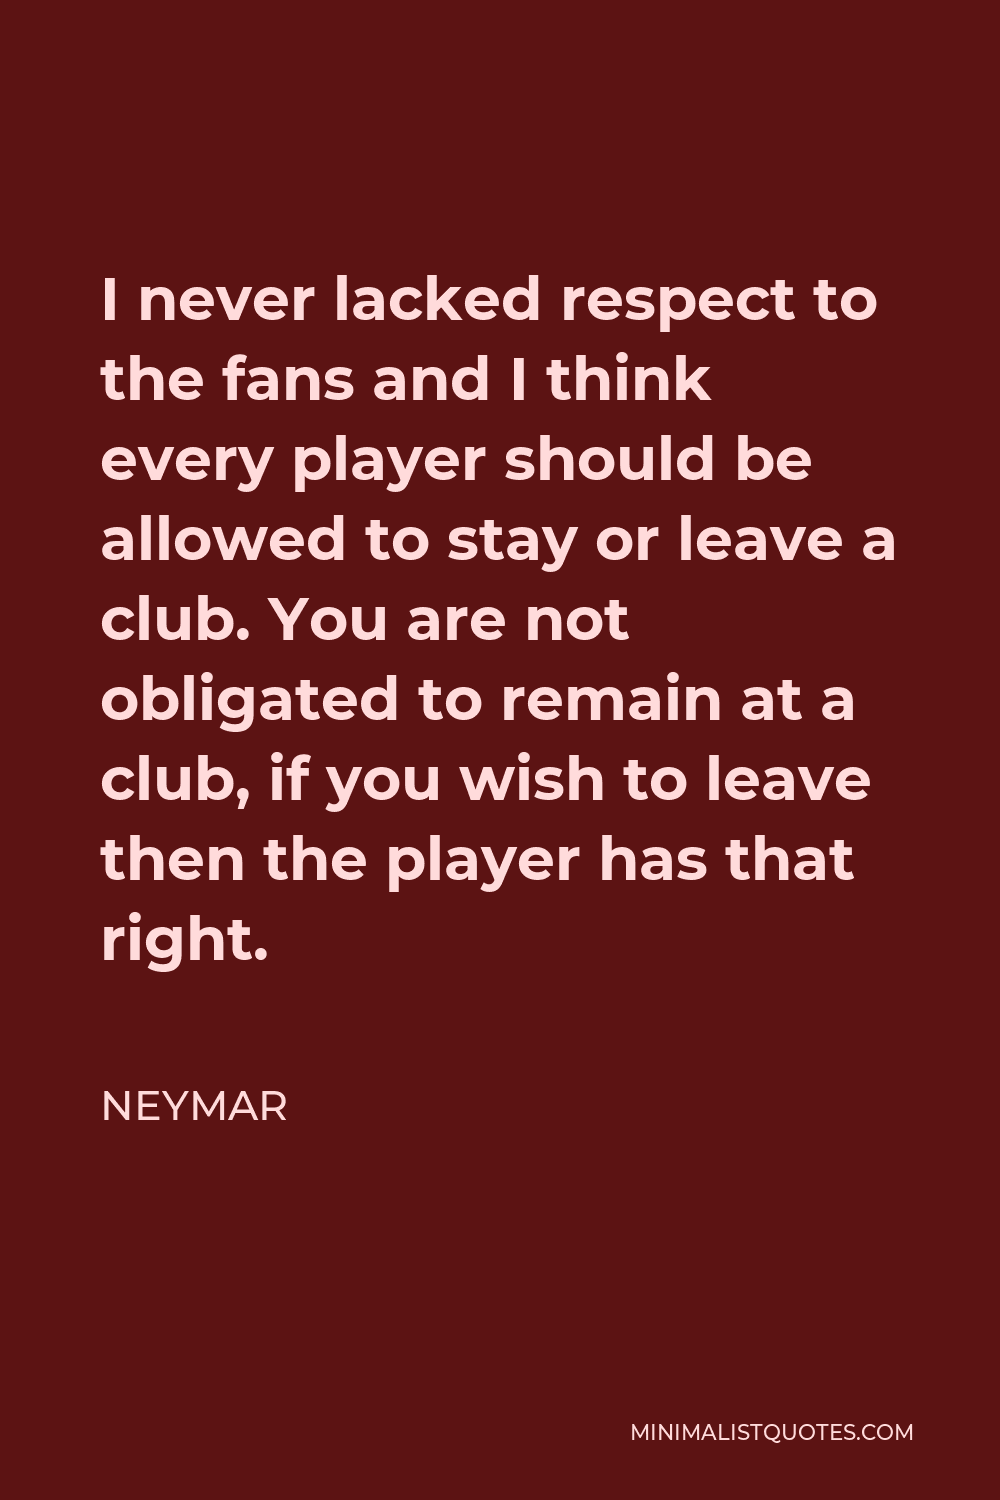 Neymar Quote - I never lacked respect to the fans and I think every player should be allowed to stay or leave a club. You are not obligated to remain at a club, if you wish to leave then the player has that right.